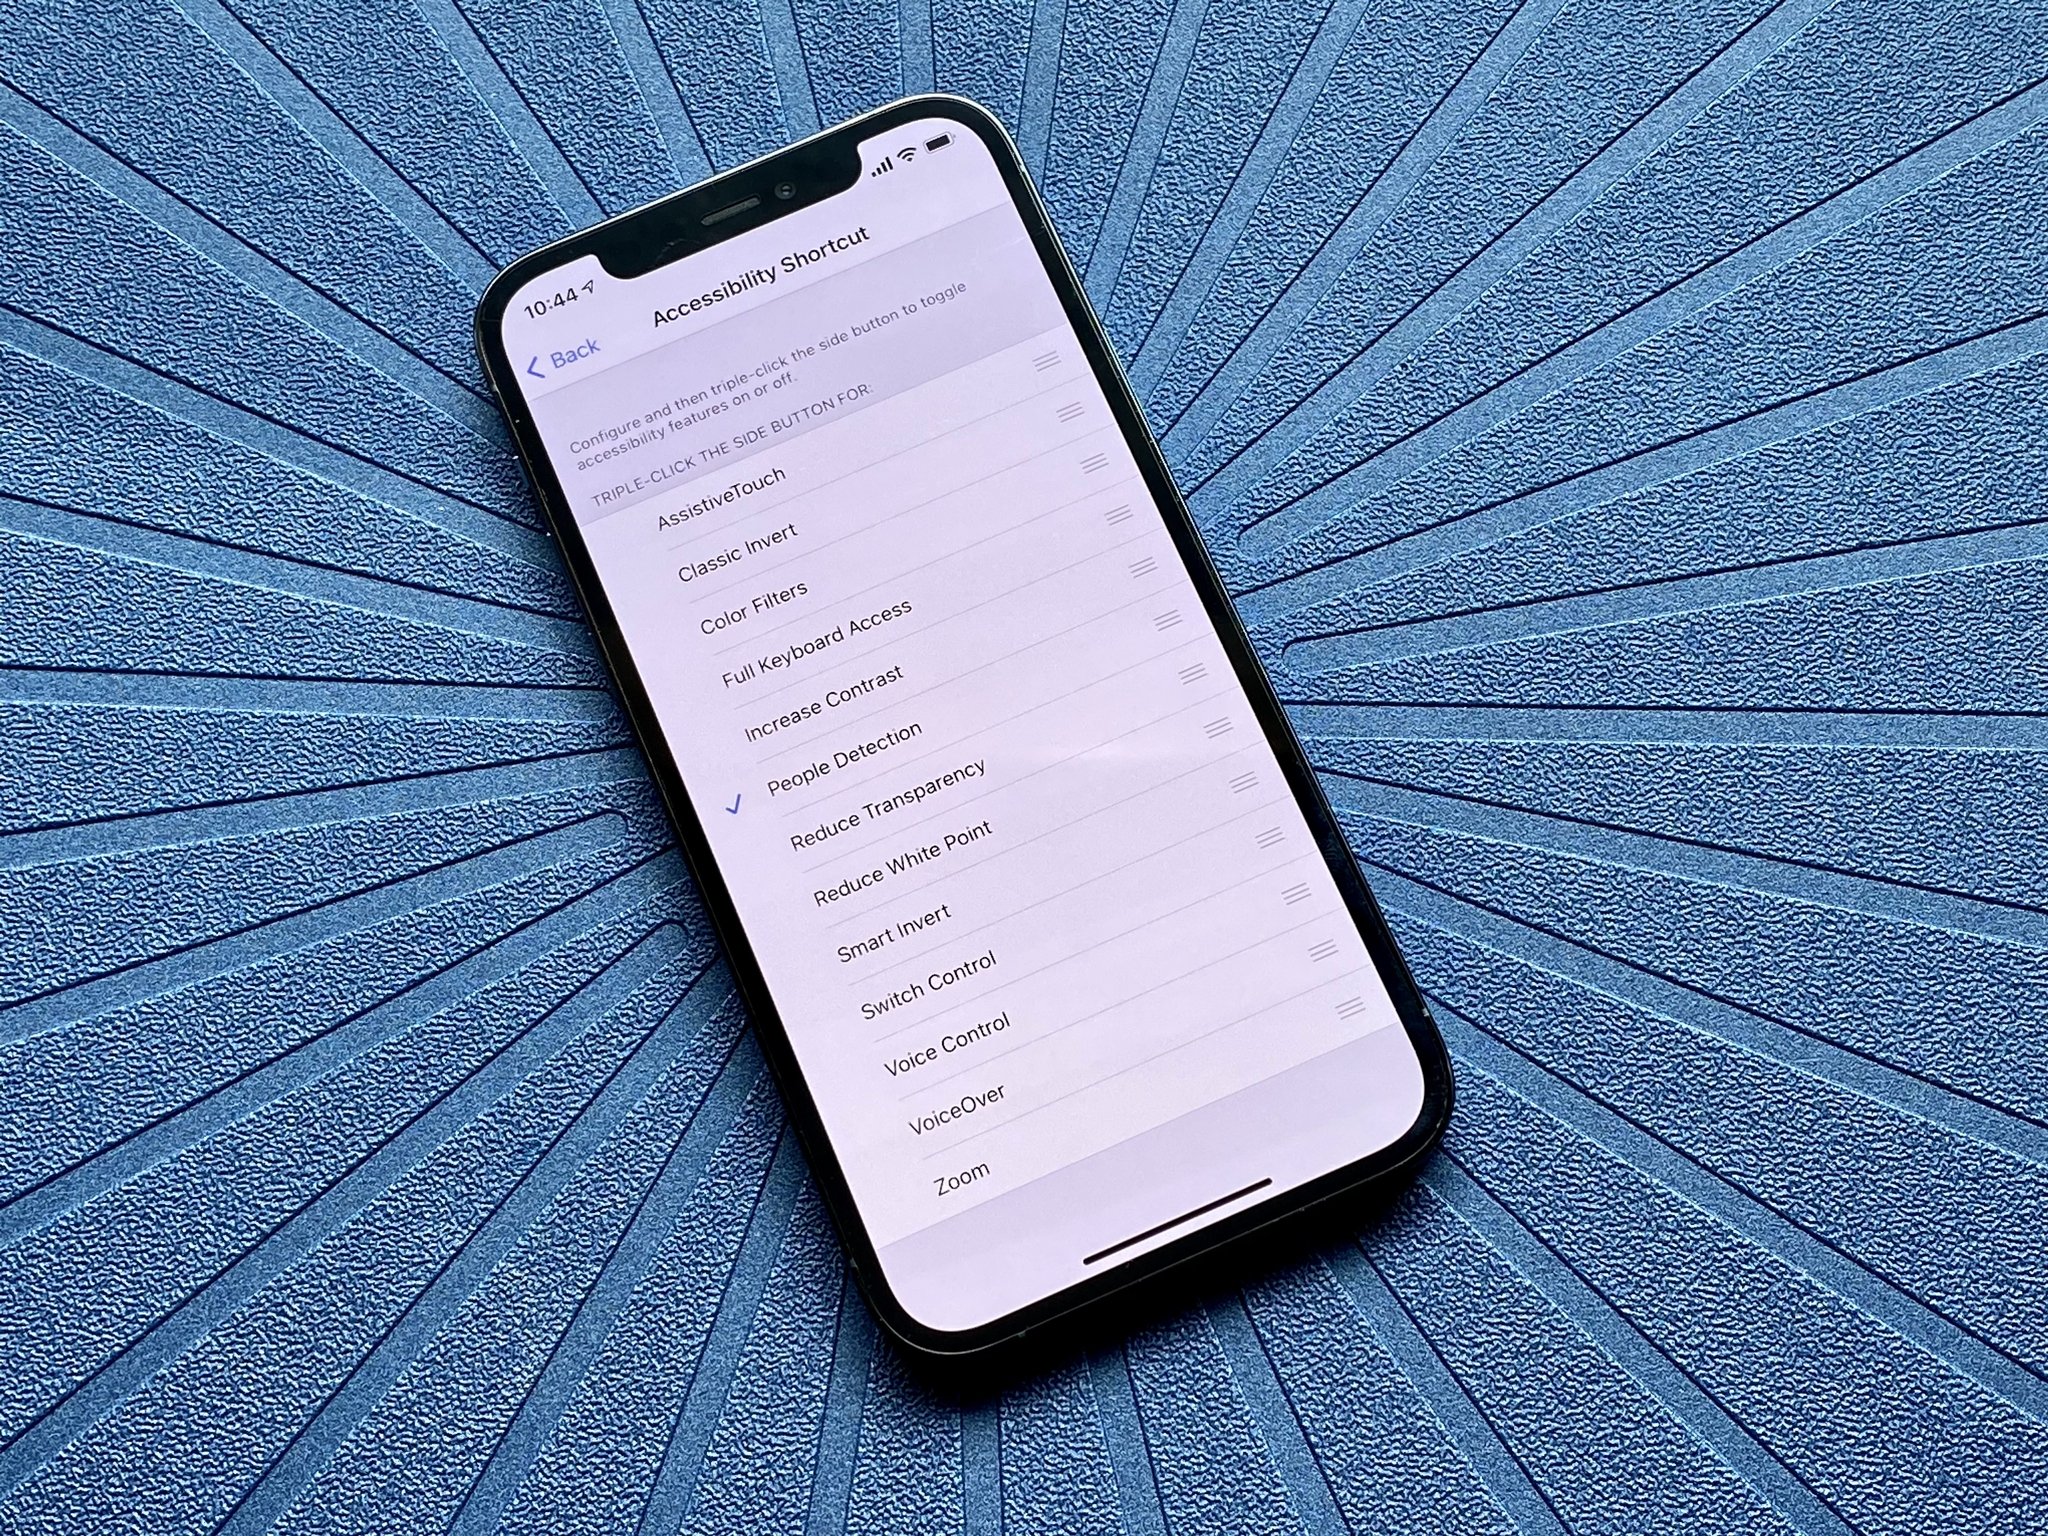 How to use and customize the Accessibility Shortcut on iPhone and